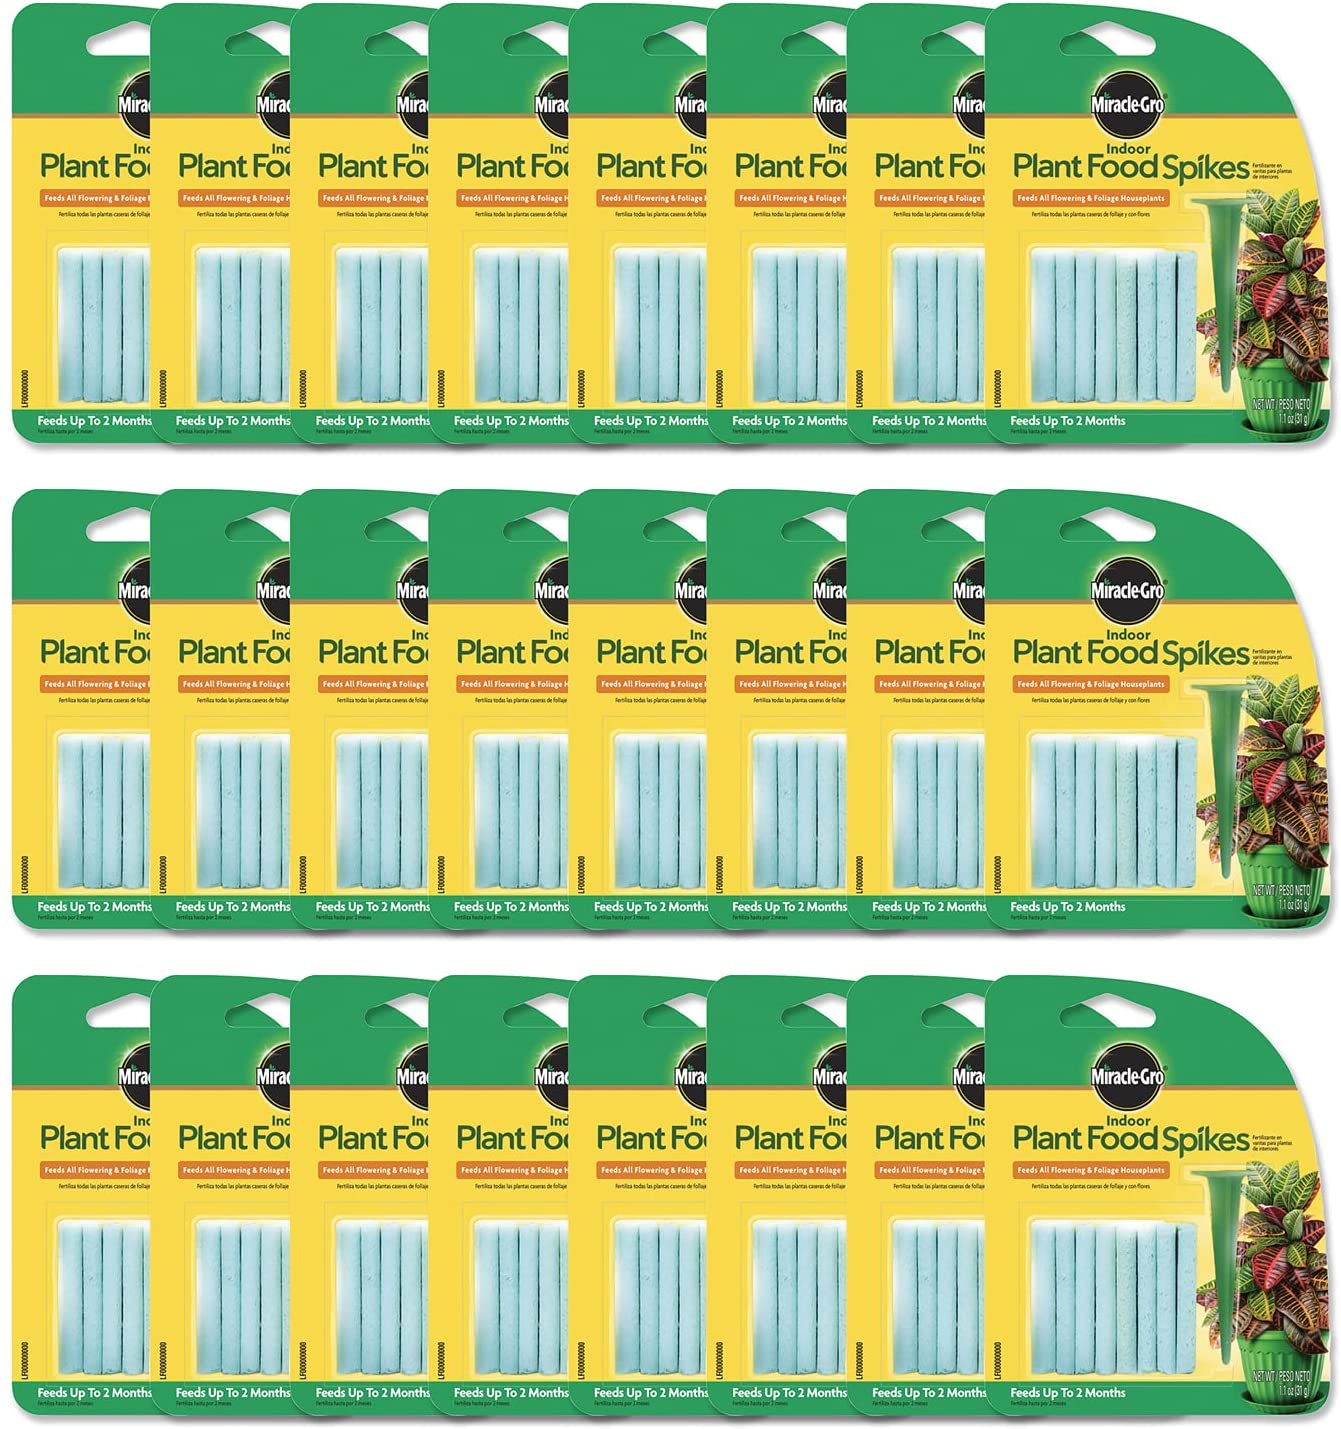 Woot Appsclusive: 24-Pack 1.1oz 24 Spike Packs (576 Total Count) Miracle-Gro Indoor Plant Food Spikes $20 + Free Shipping w/ Prime